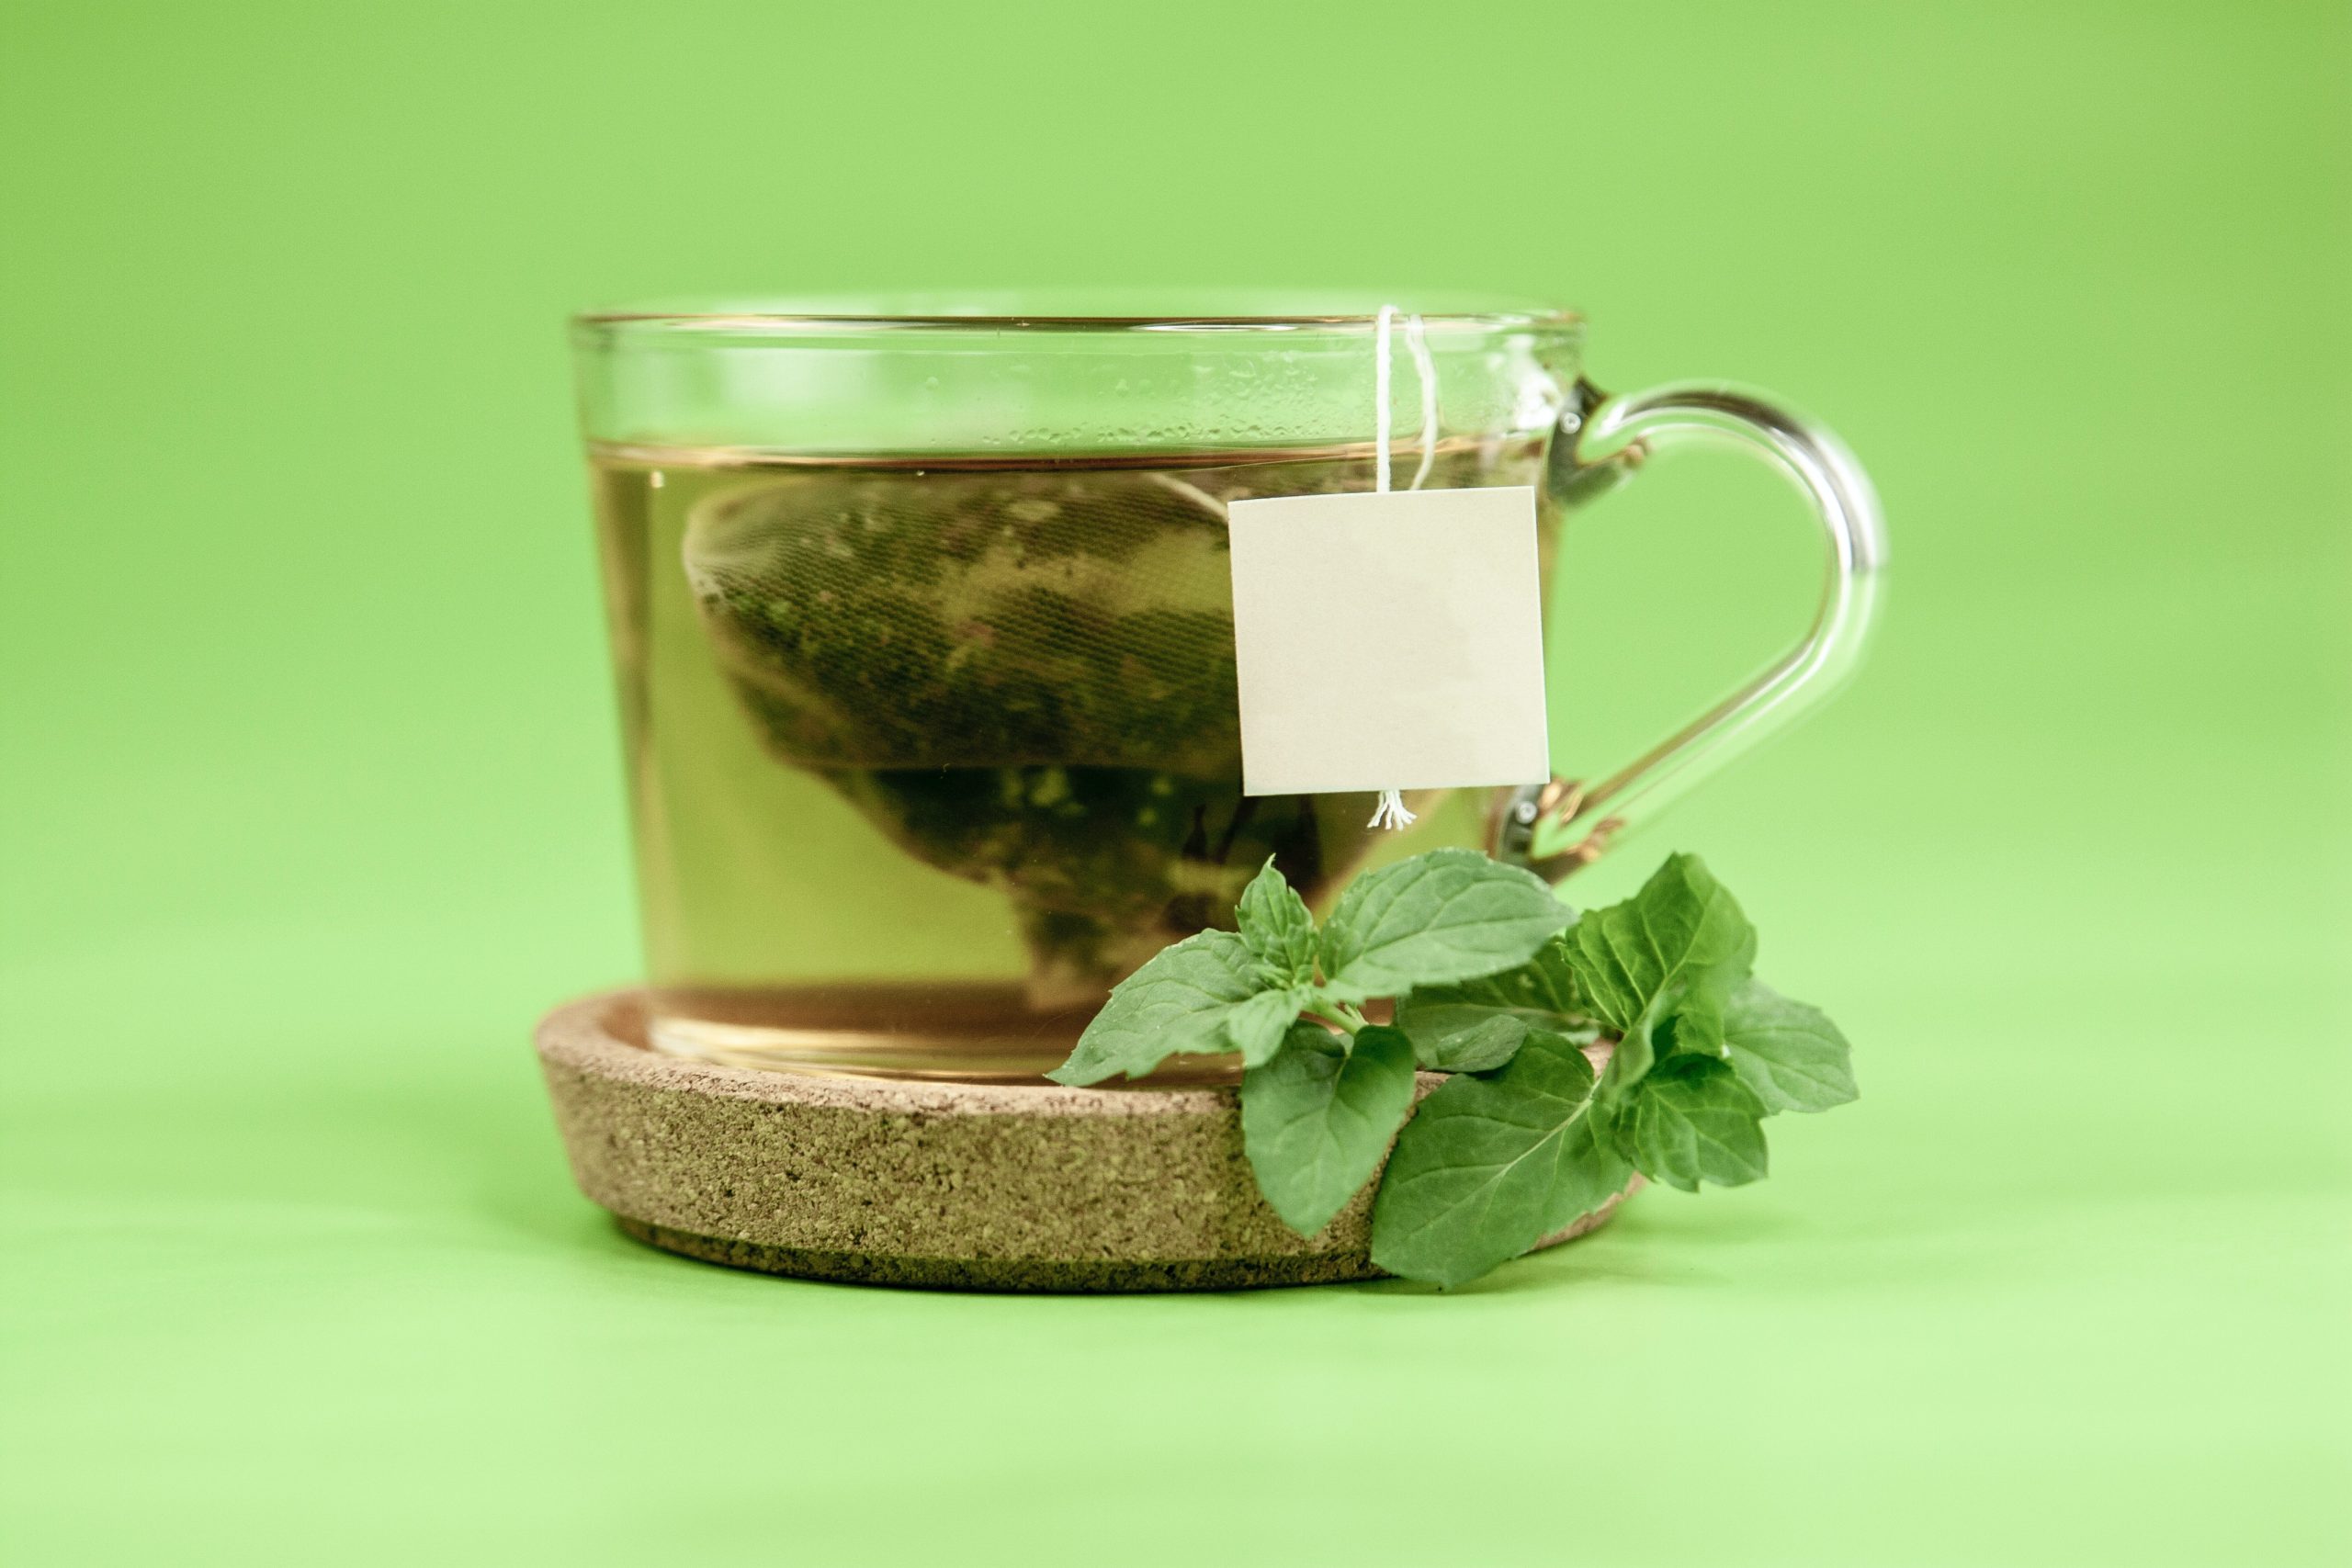 Mint vs peppermint: the differences, teas and uses